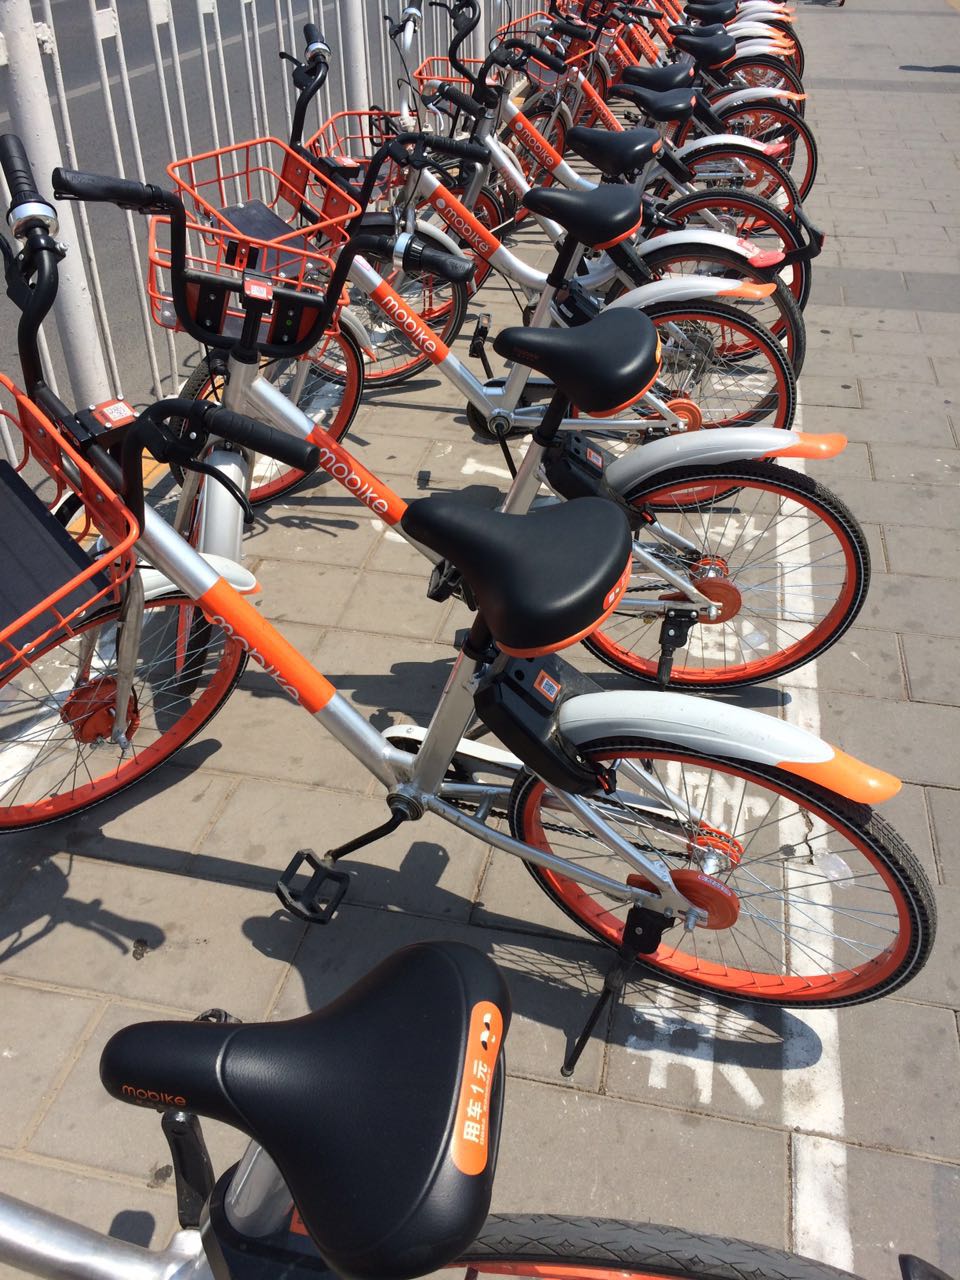 Shared bikes parked in a specific location near the Babaoshan subway station established by the local government in Beijing's Shijingshan District on May 17, 2017. [Photo: Chinaplus]